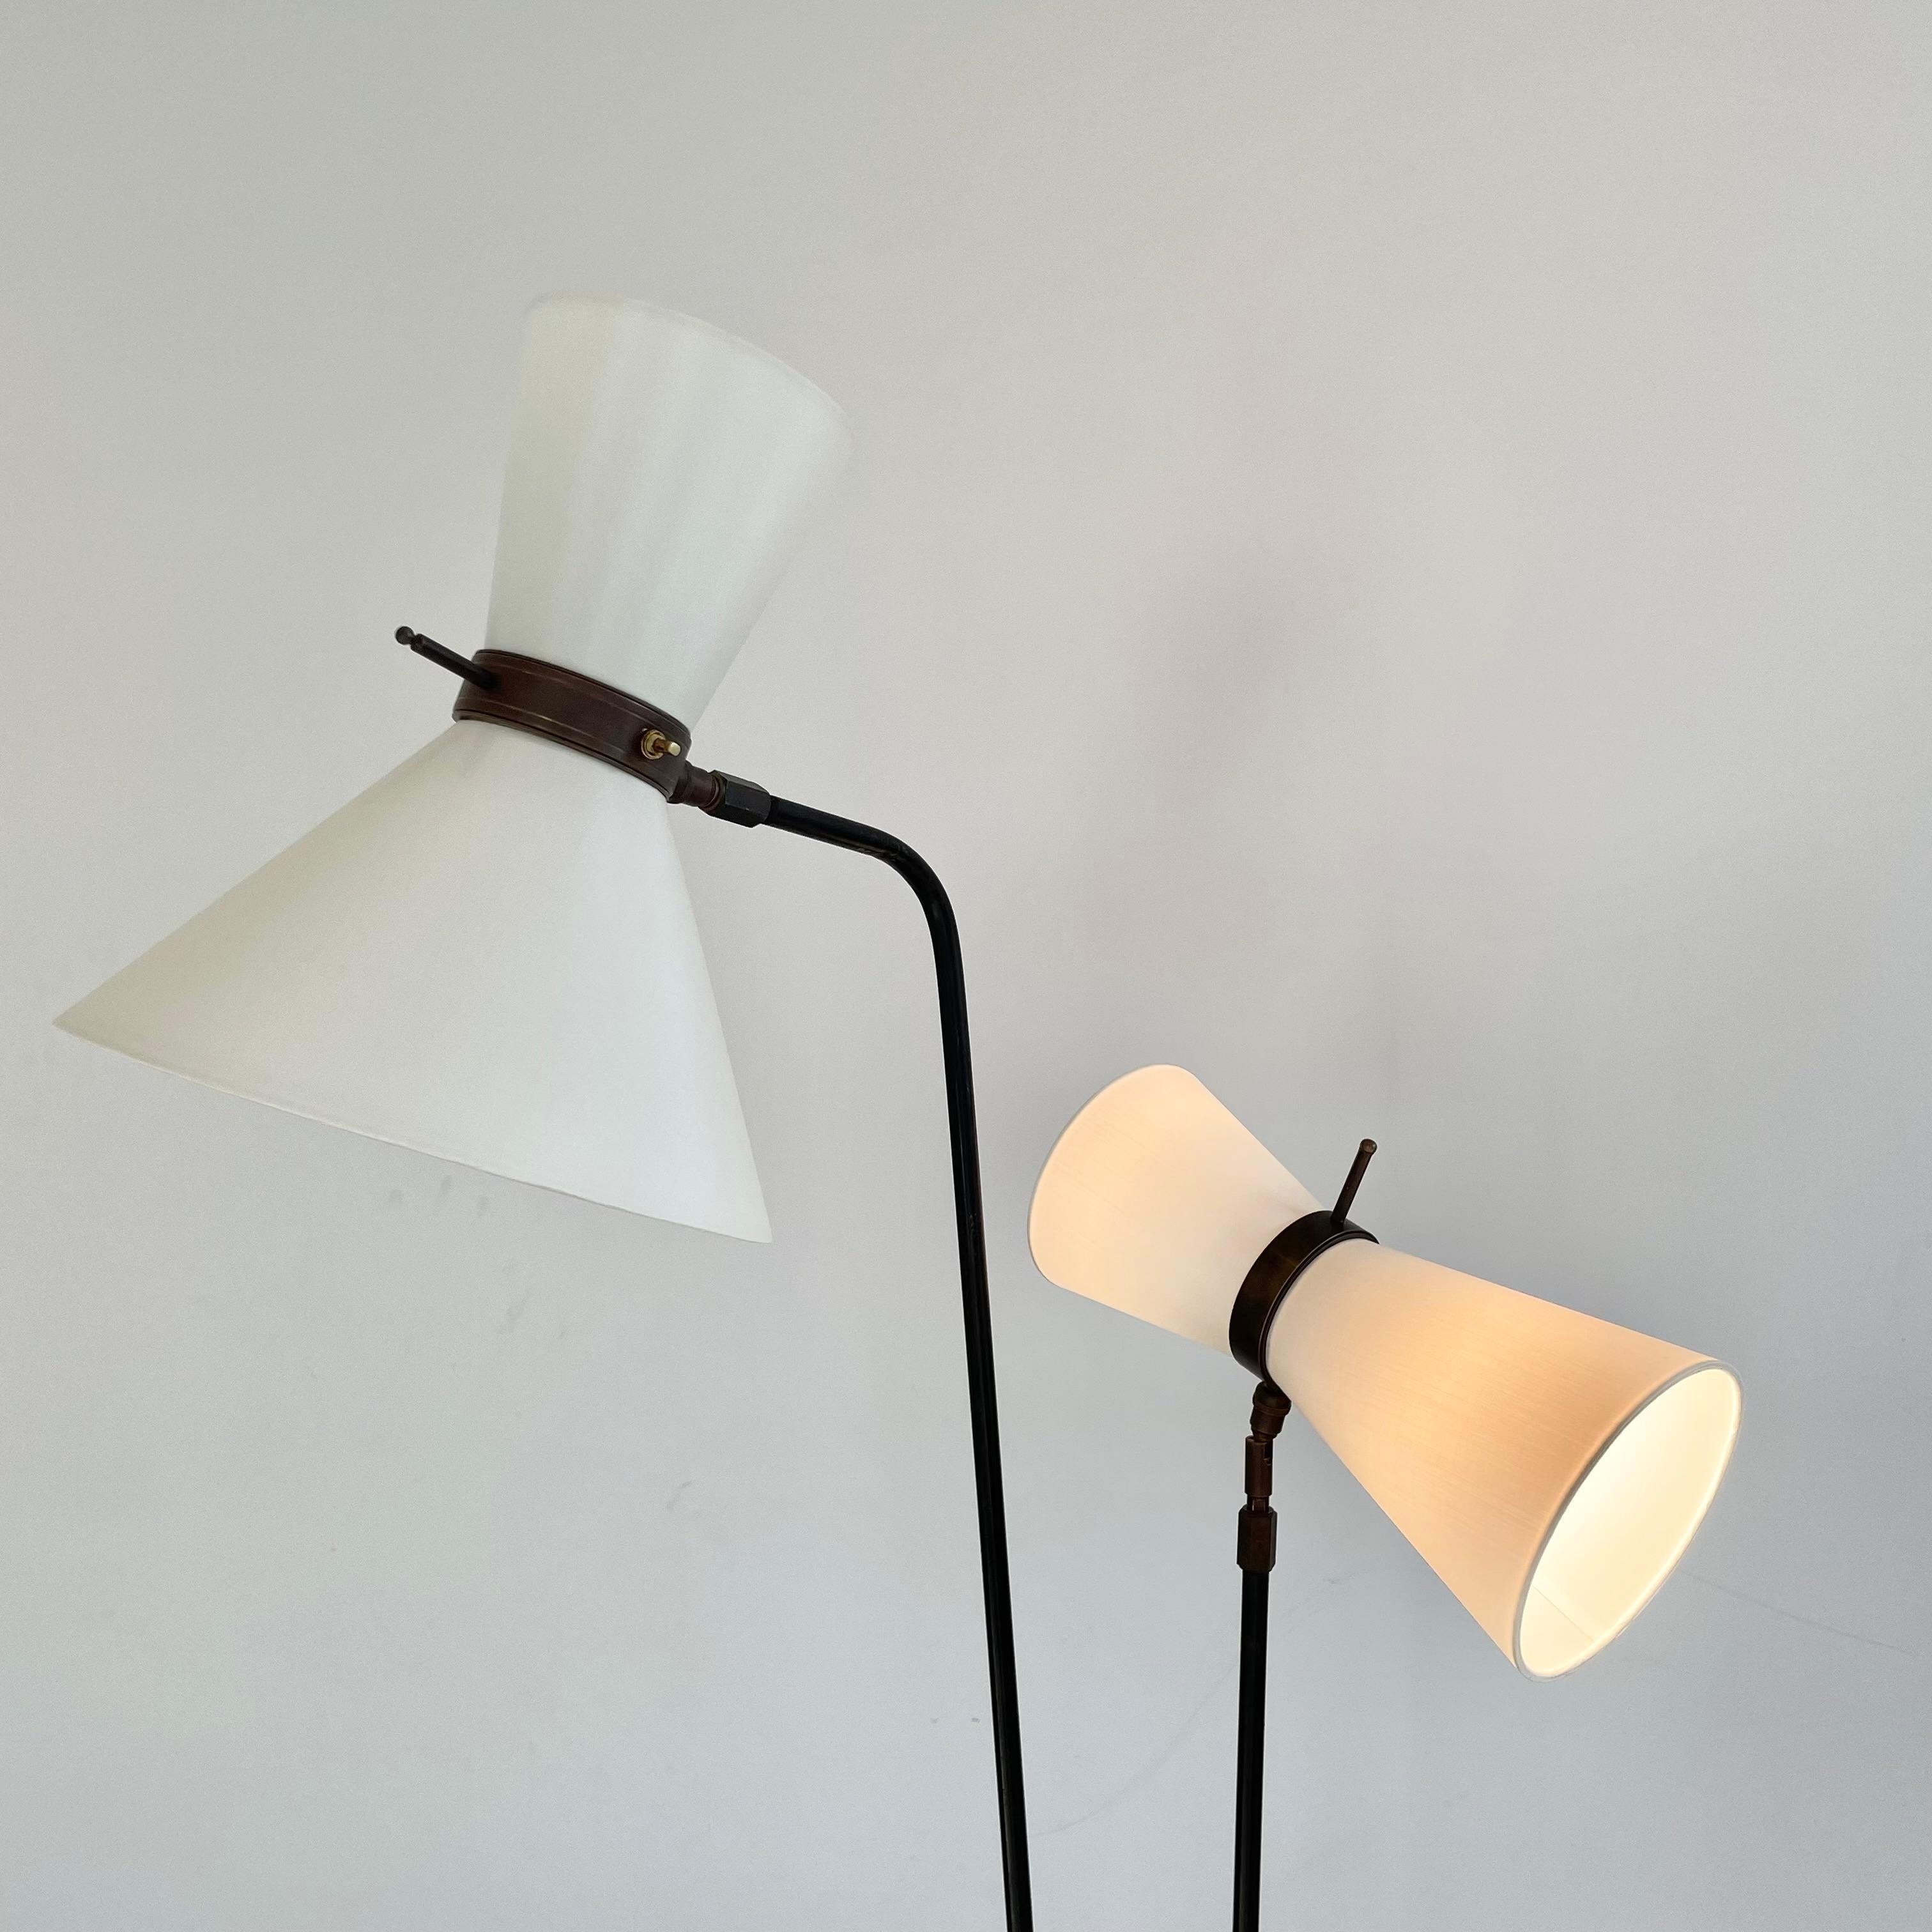 Double Headed Articulating Floor Lamp, 1950s France For Sale 2